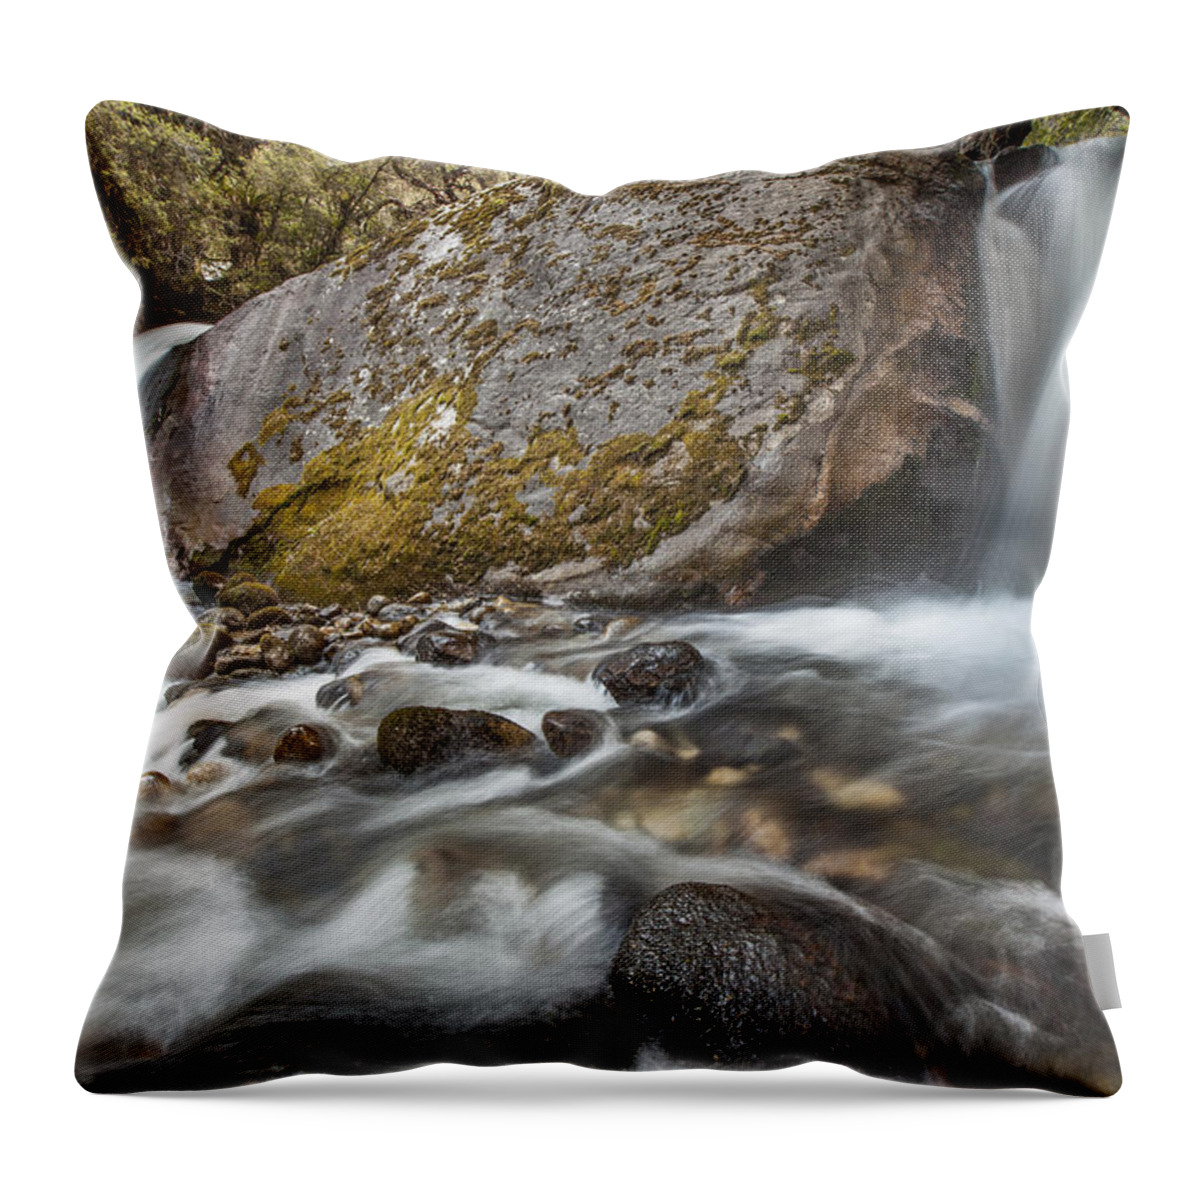 00498193 Throw Pillow featuring the photograph Waterfall On The Yanganuco River by Colin Monteath